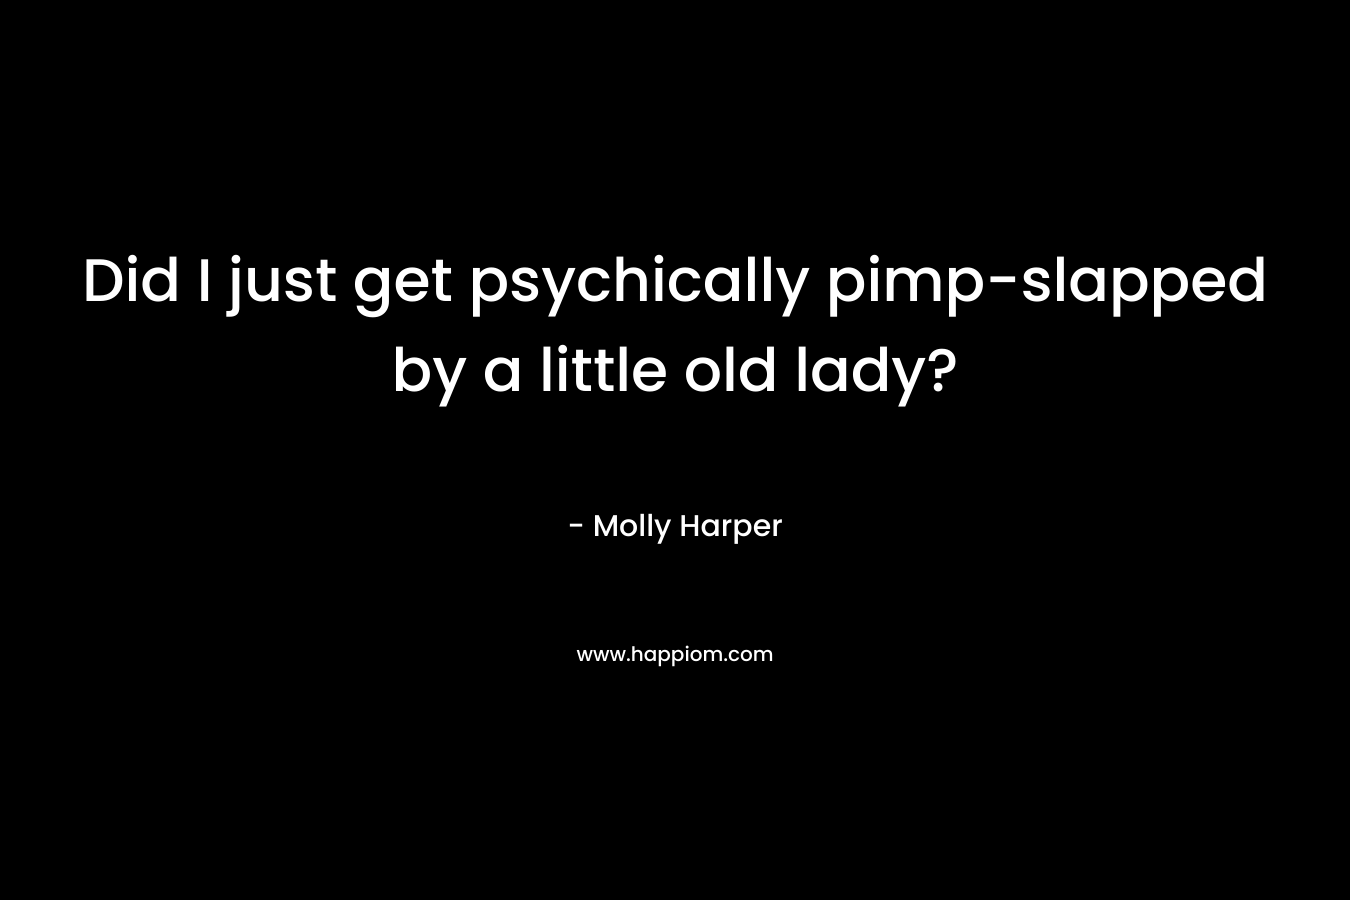 Did I just get psychically pimp-slapped by a little old lady?